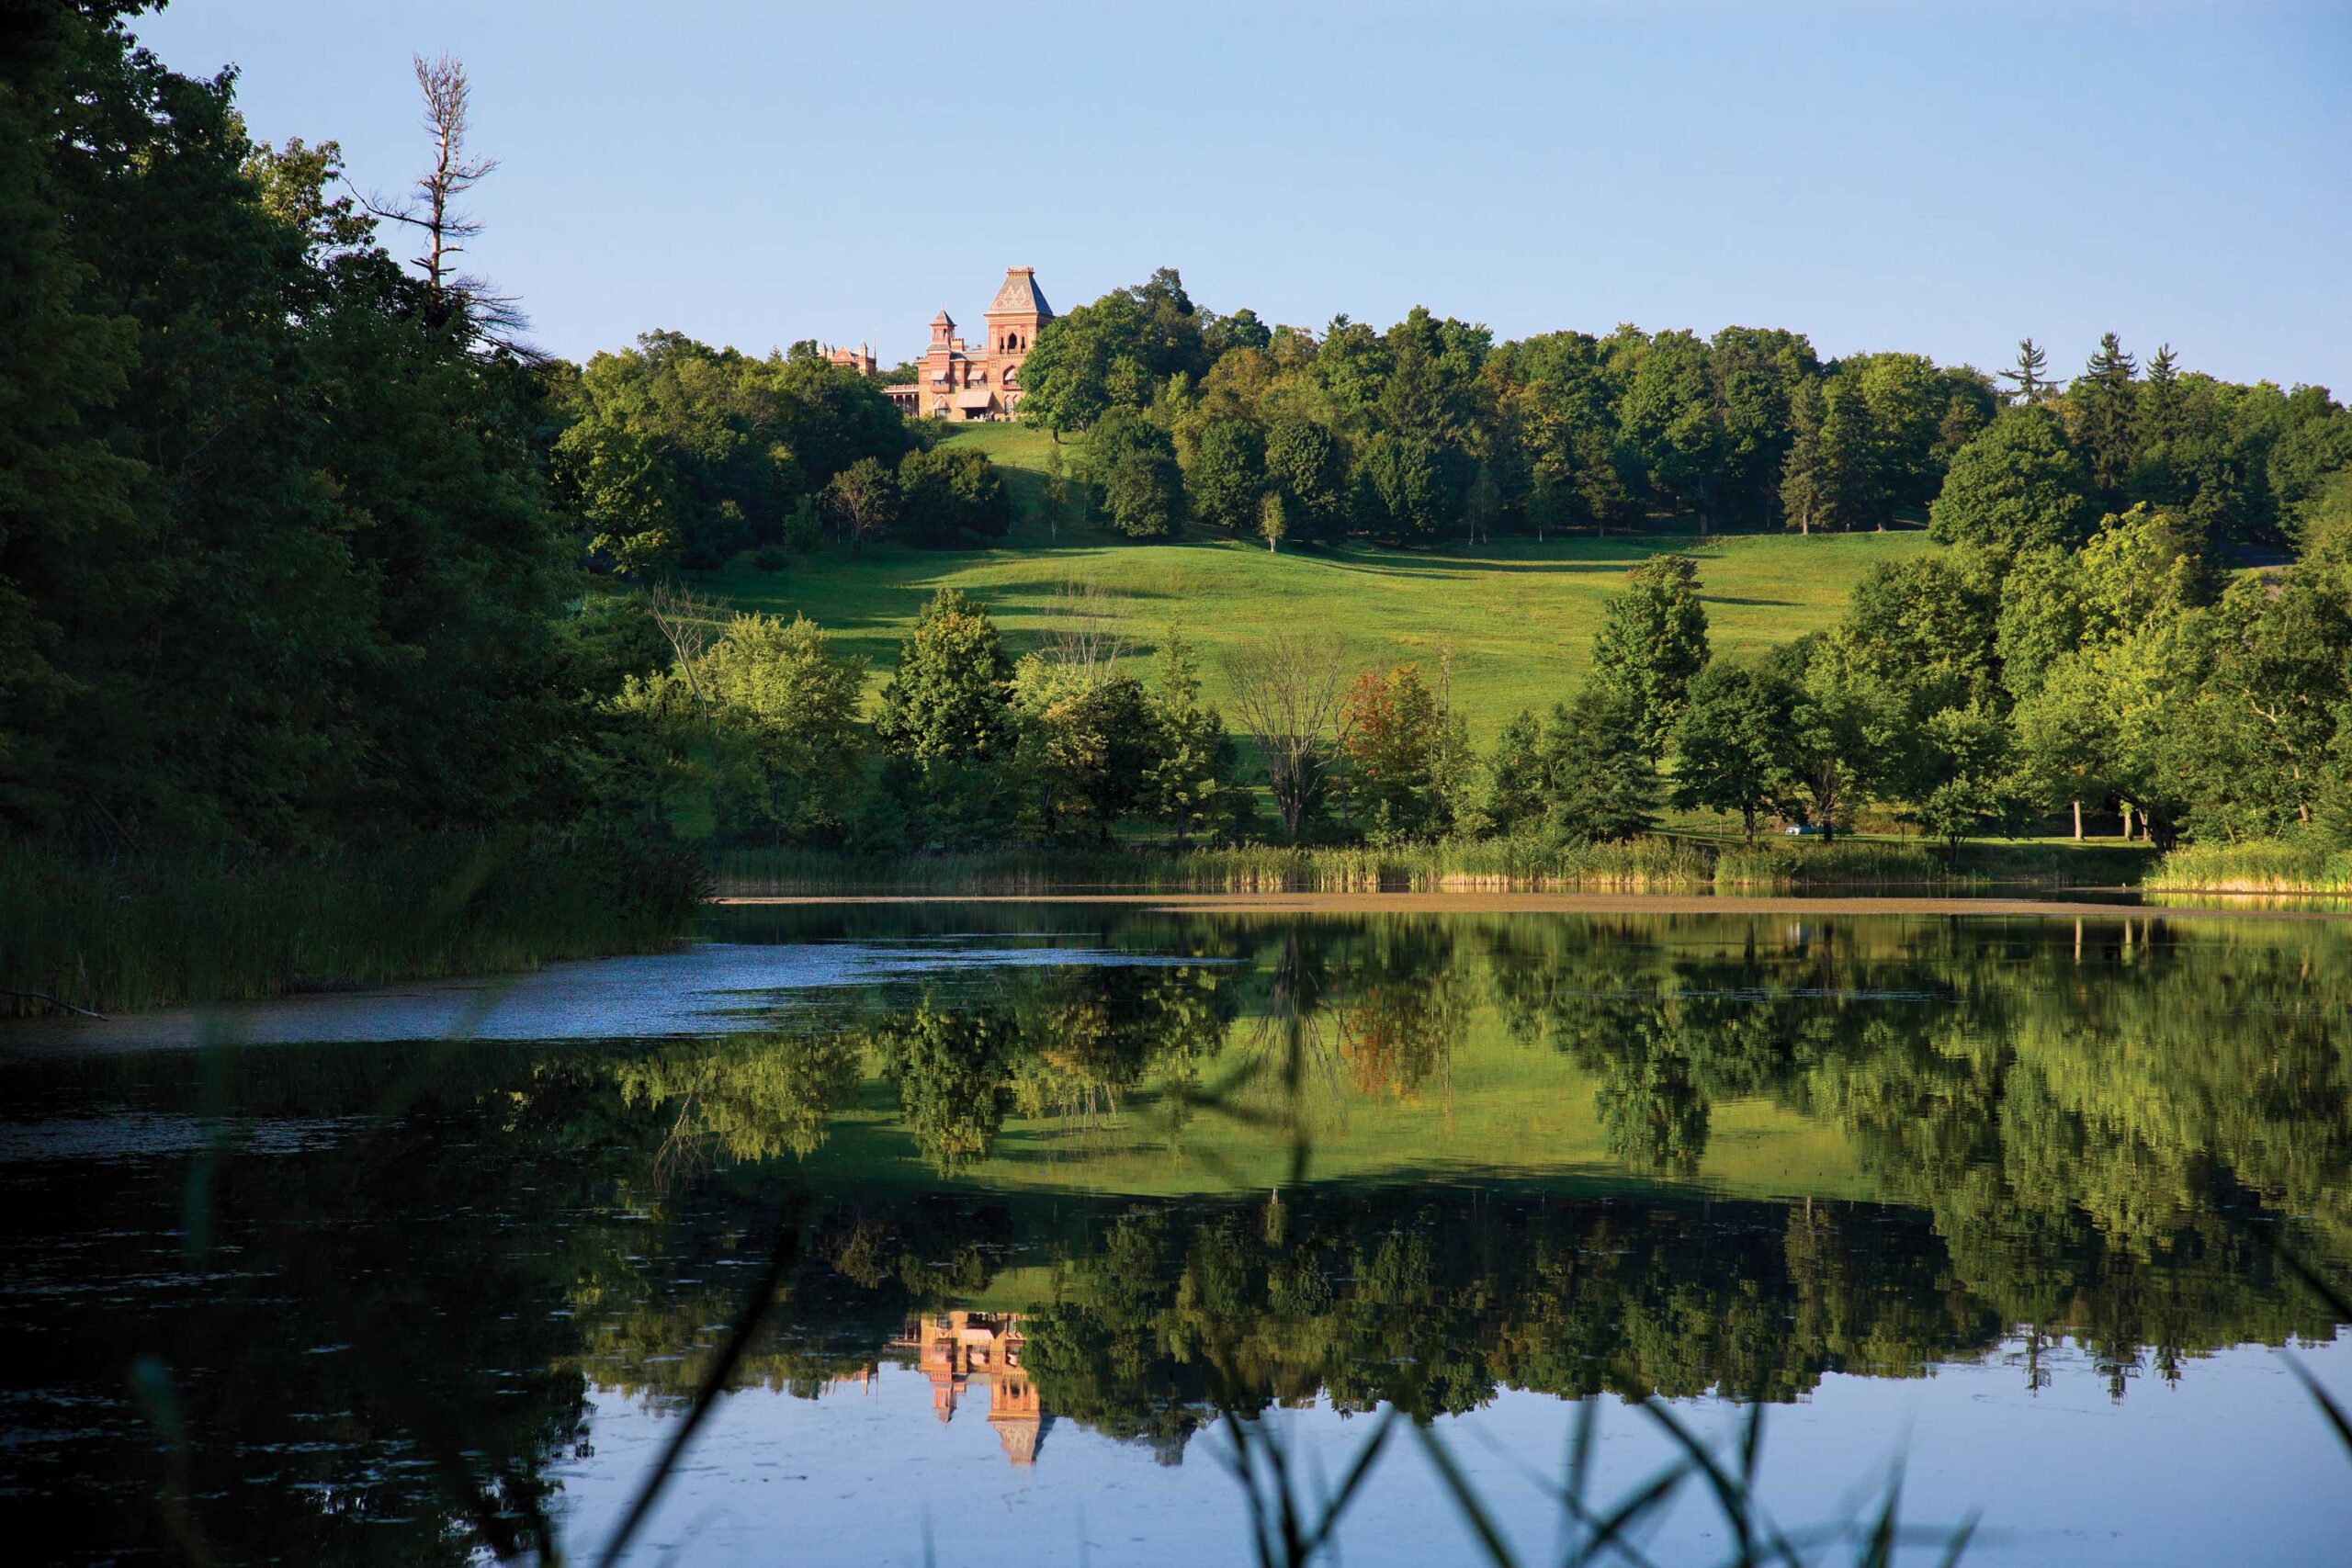 View across the lake to the Main House at Frederic Church’s Olana, Hudson, New York; photo © Peter Aaron/OTTO, 2010, courtesy of the artist